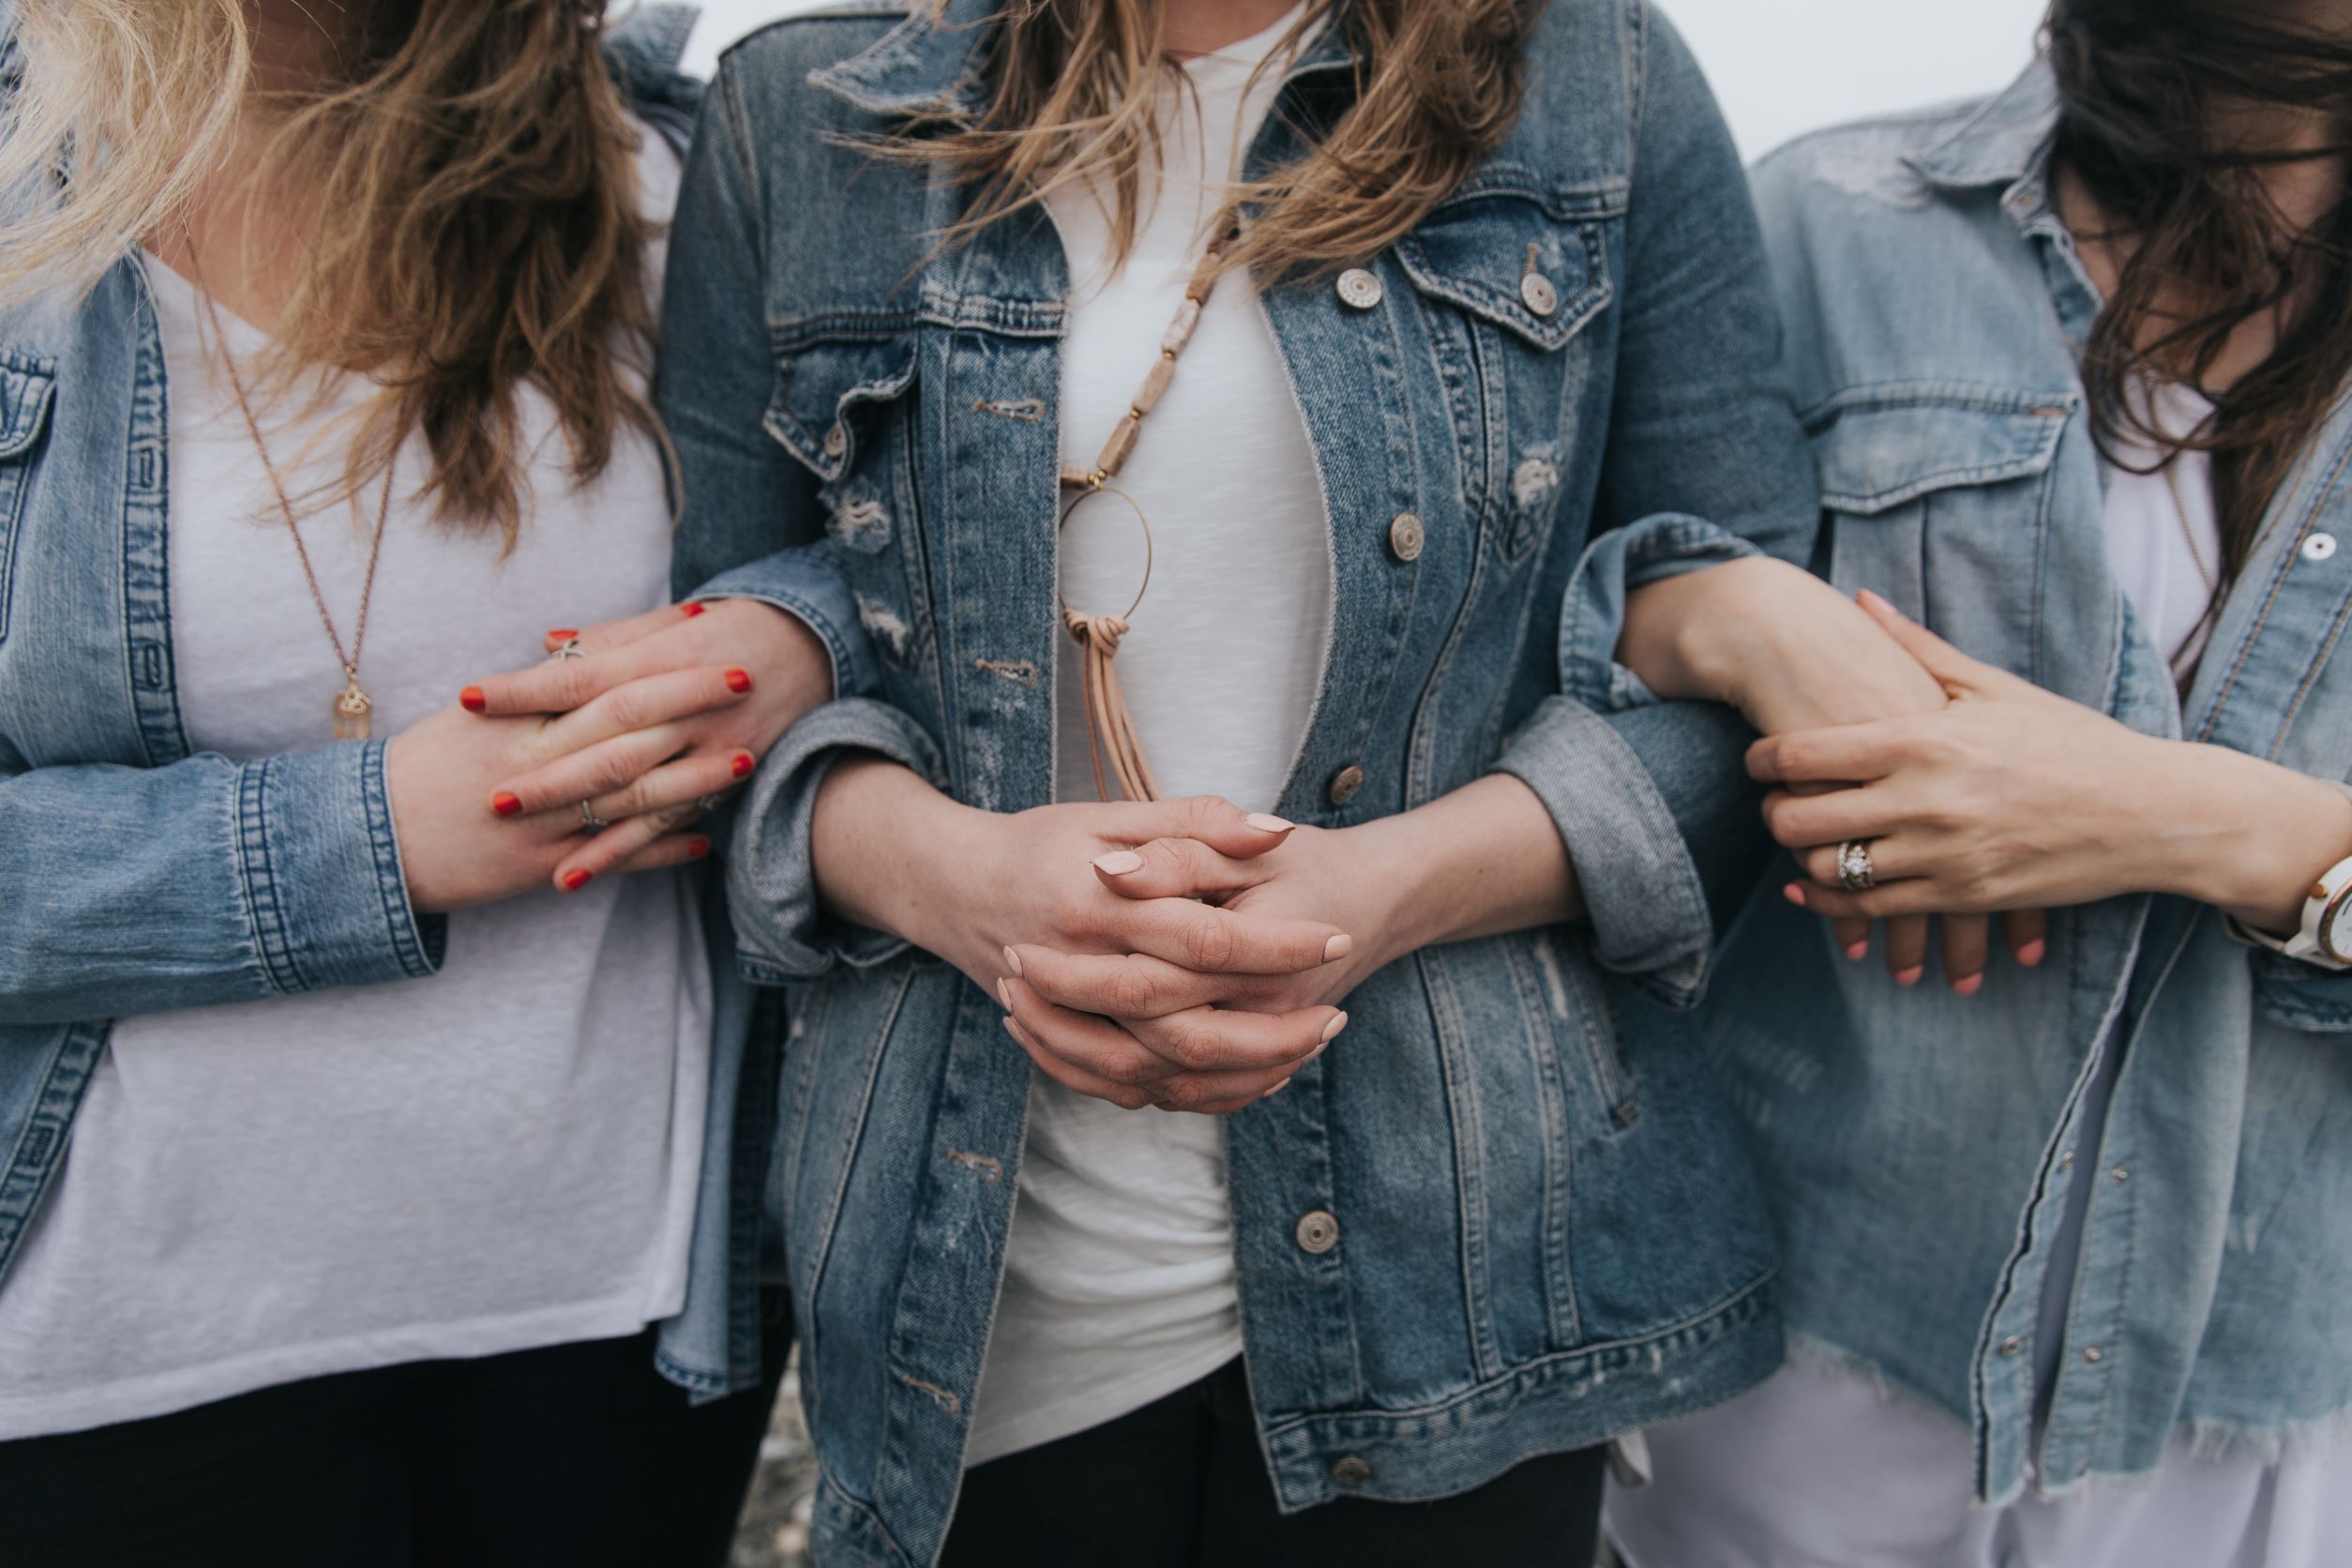 Three women in white tops and denim jackets linked arms